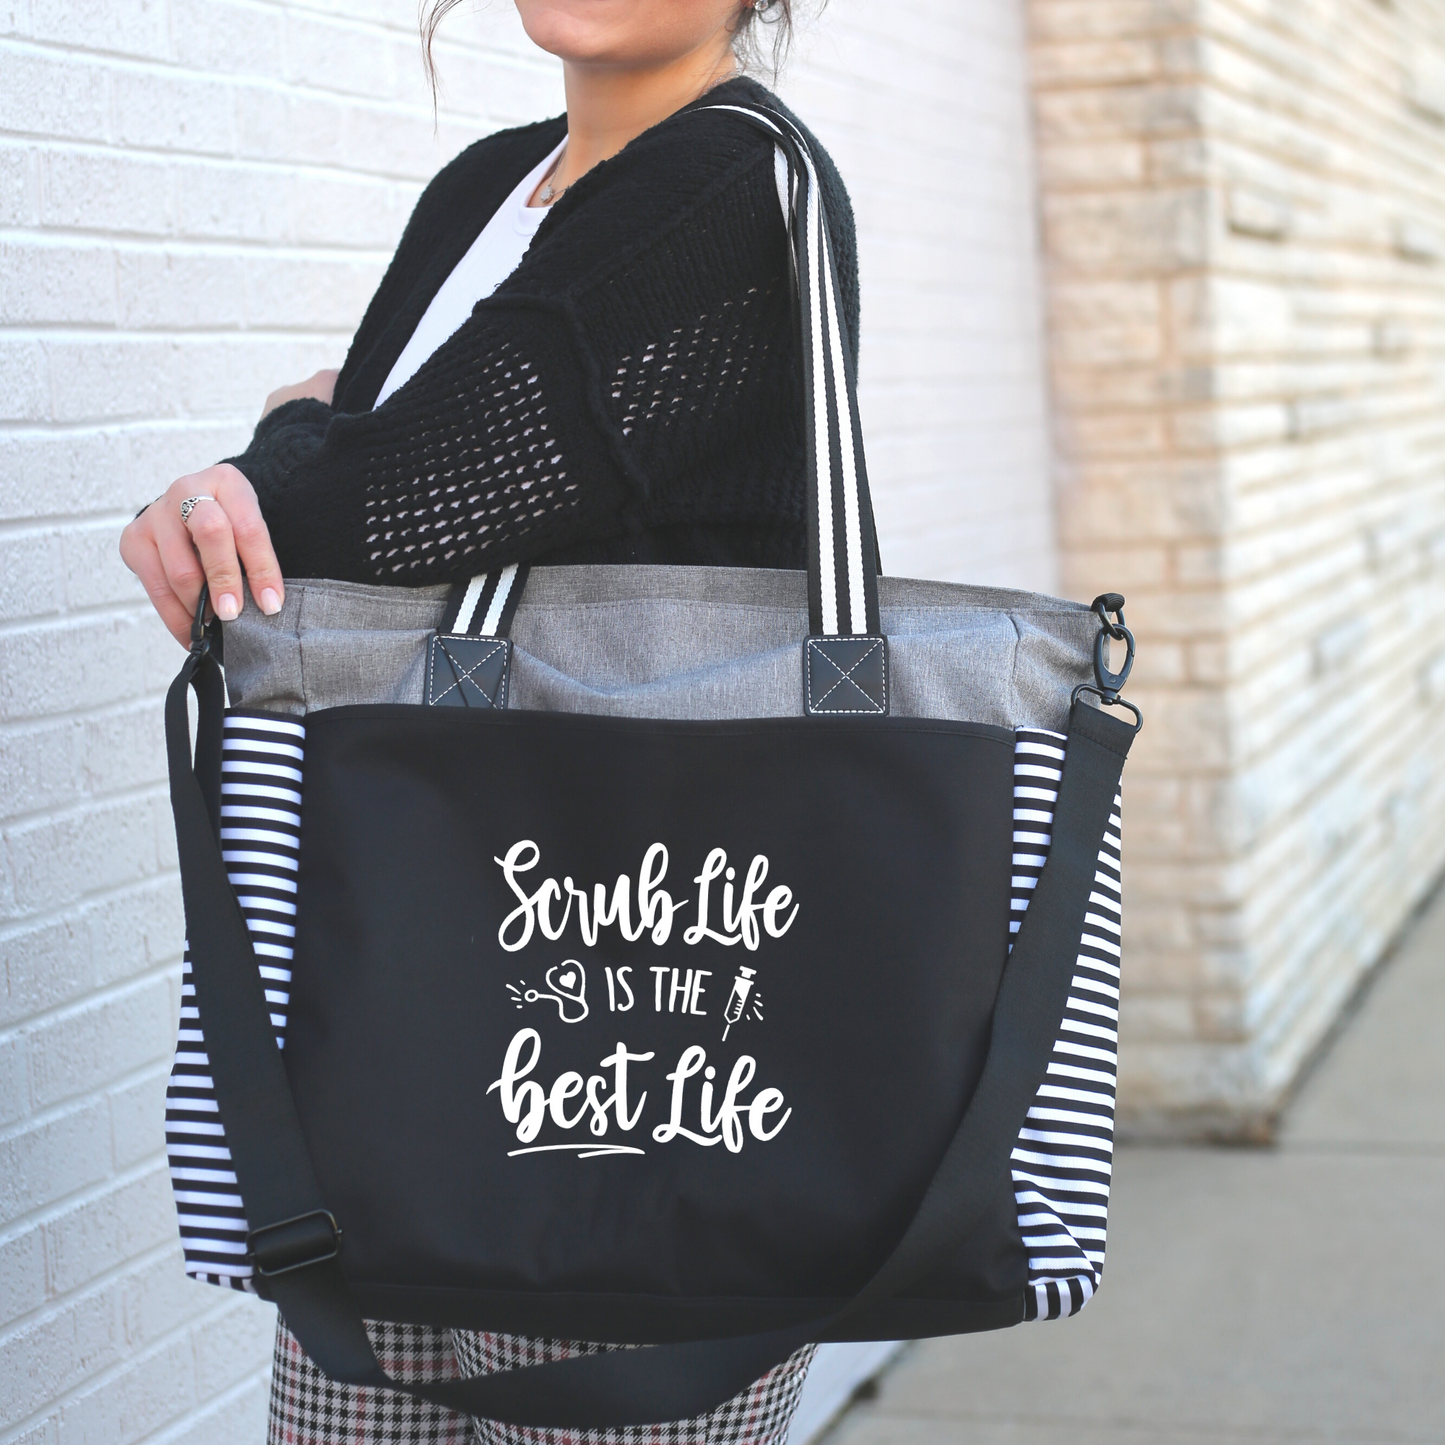 Scrub Life LouLou Gray Tote Bag for Medical Workers